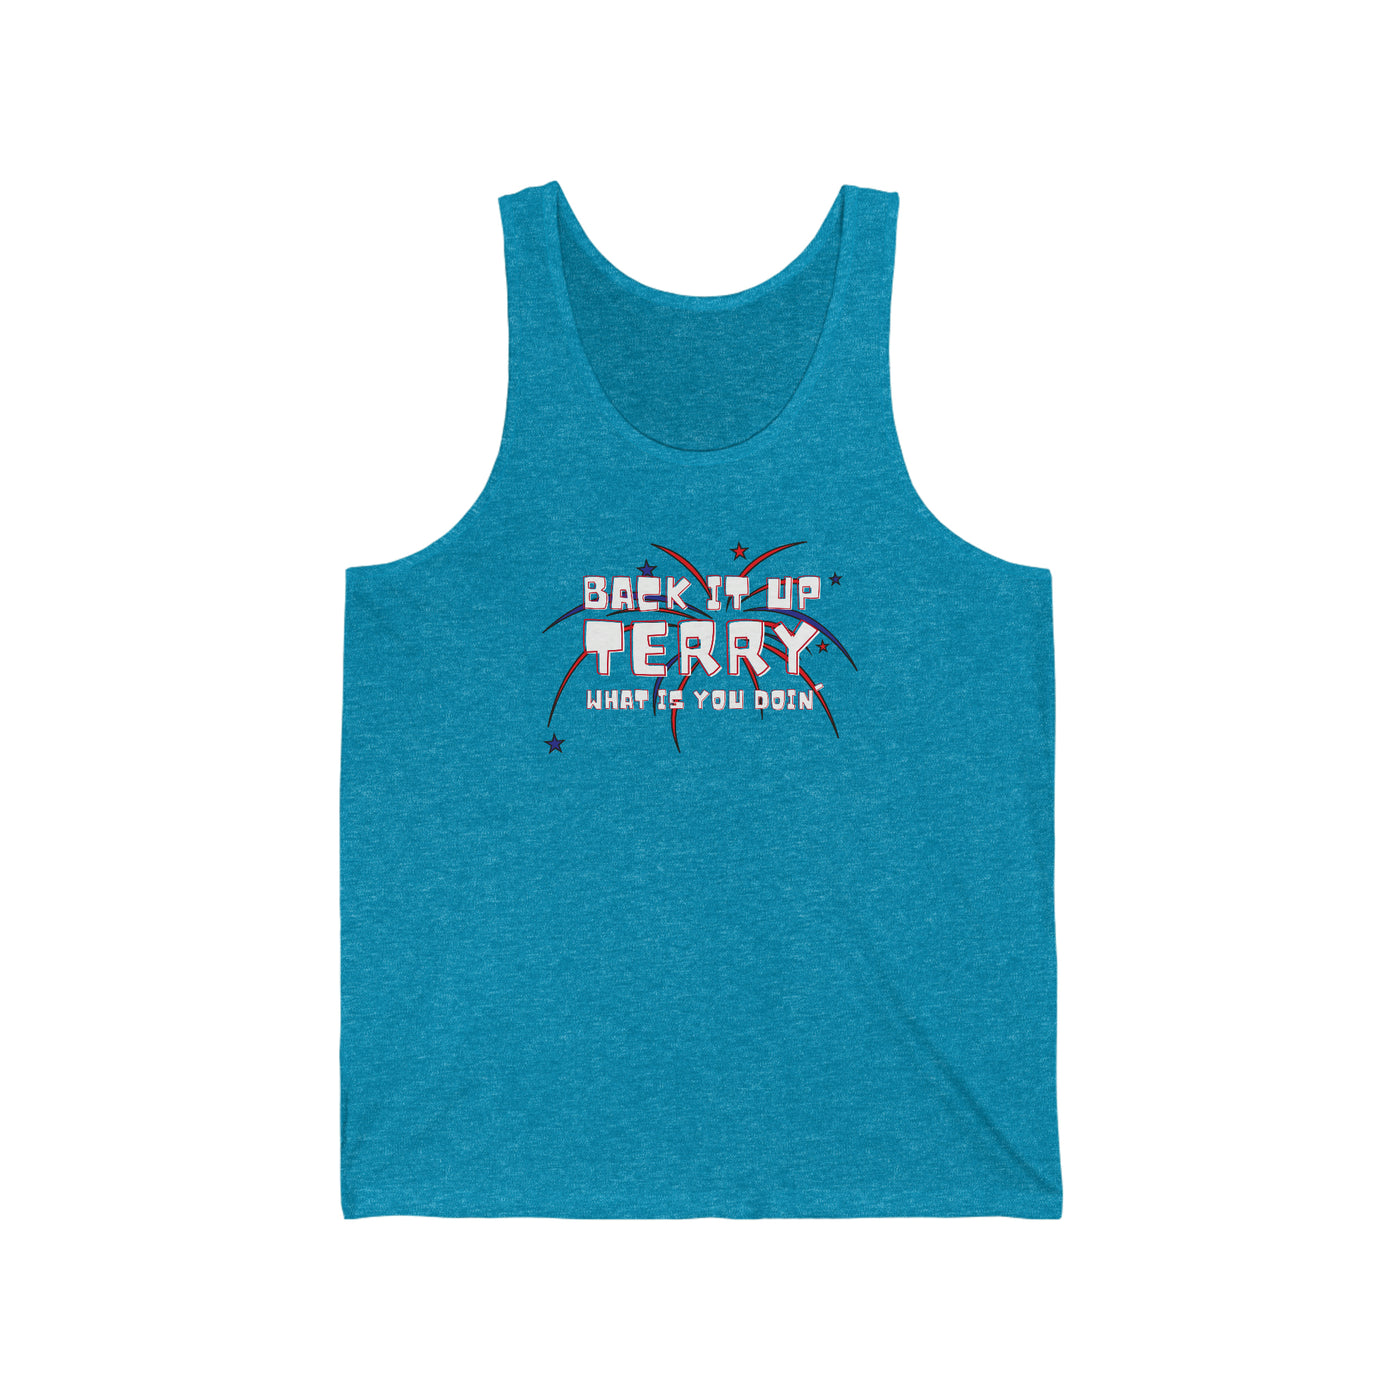 Back It Up Terry What Is You Doin' Unisex Tank Top